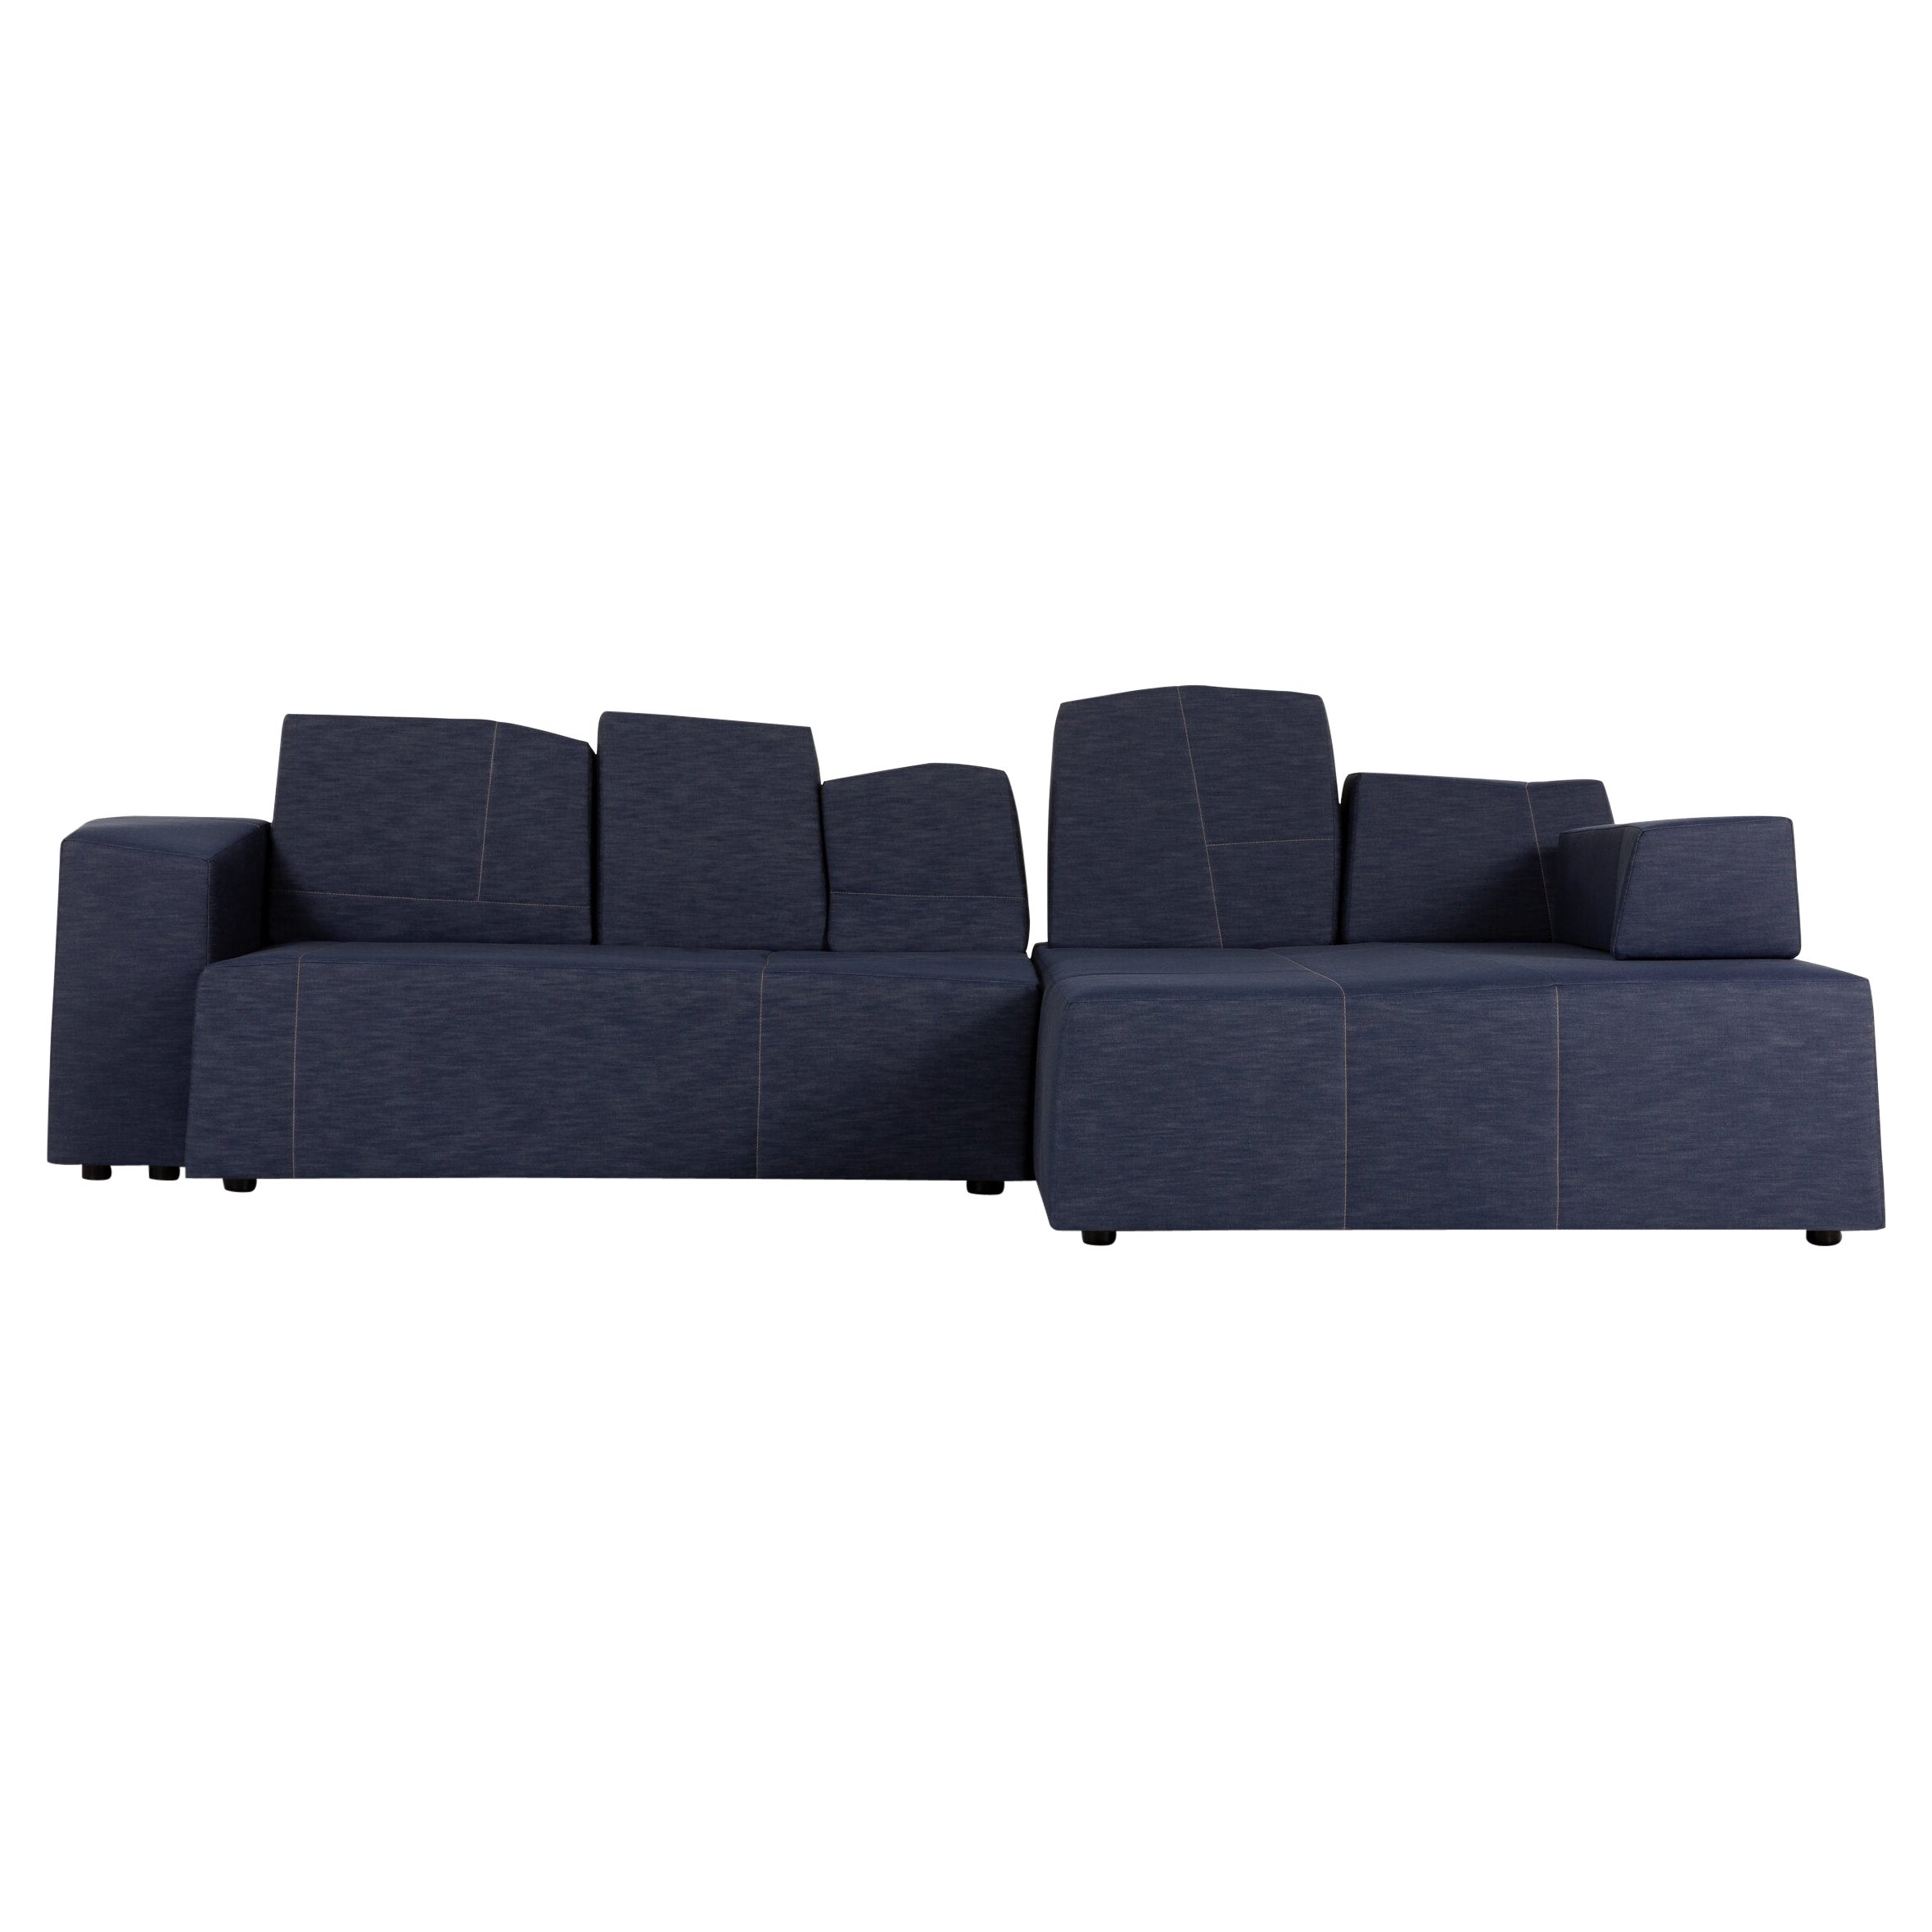 Moooi SLT Chaise Longue Right in Denim Indigo Upholstery with Steel Frame